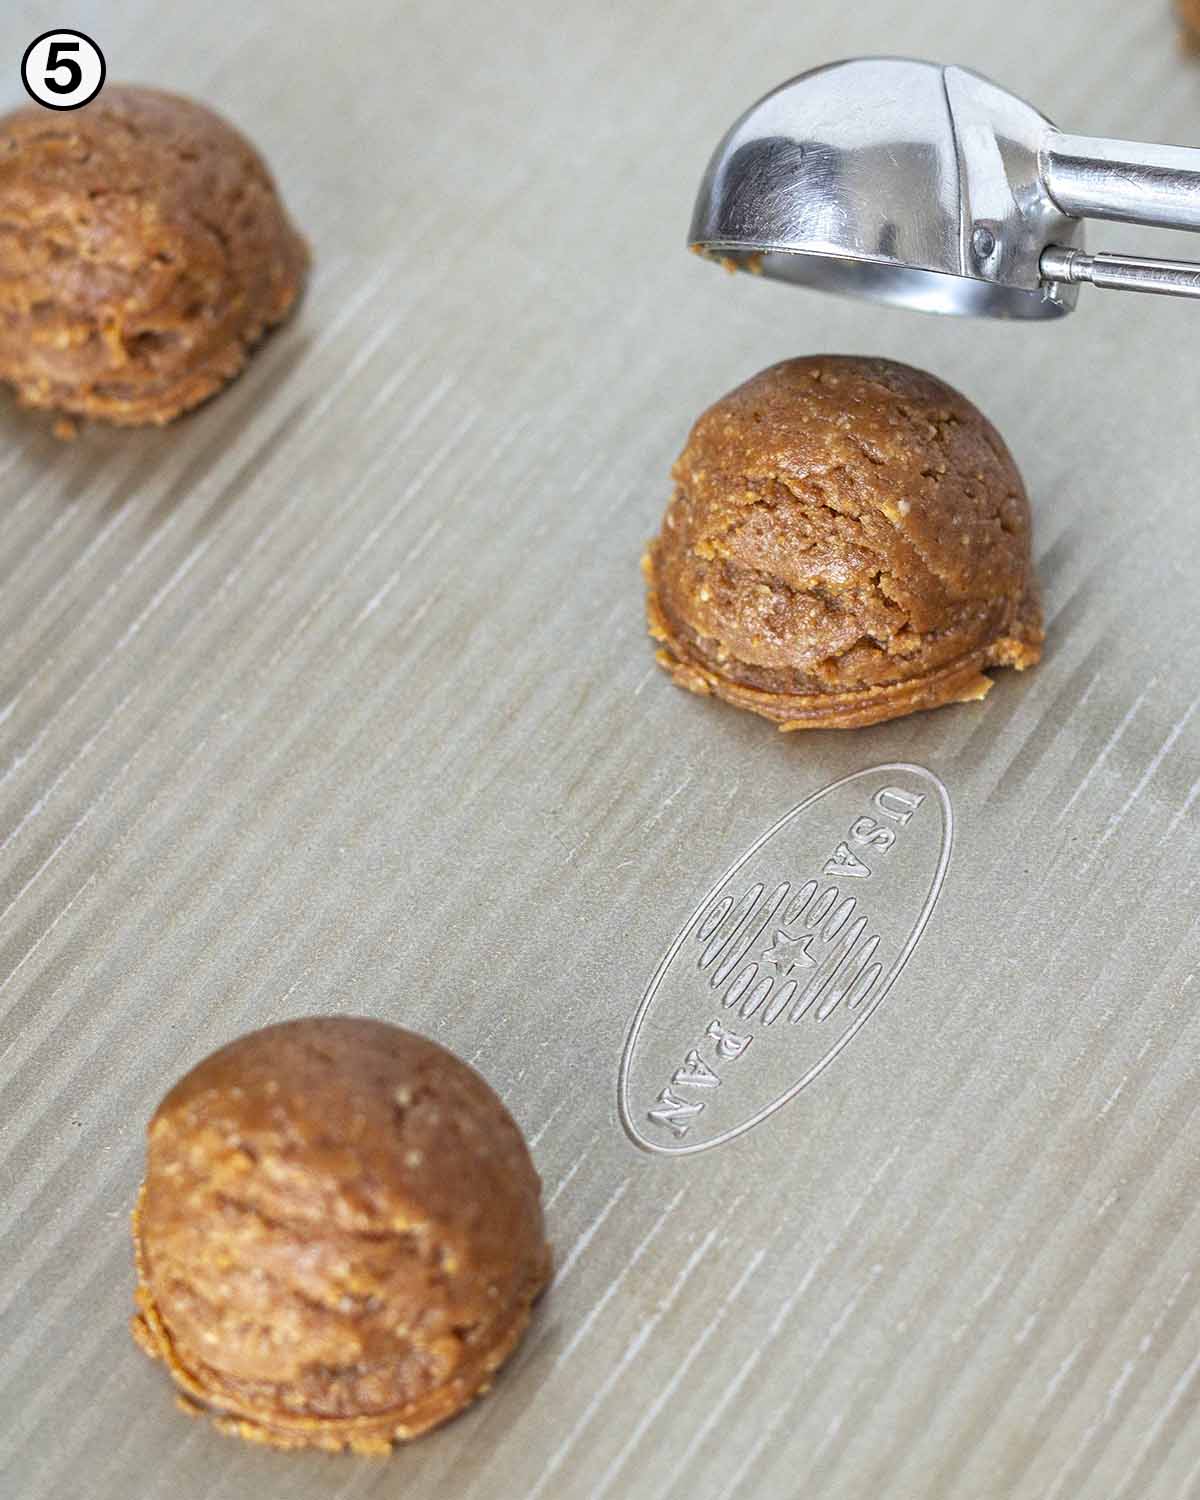 Vegan almond flour peanut butter cookies being put on a cookie sheet with a cookie scoop.